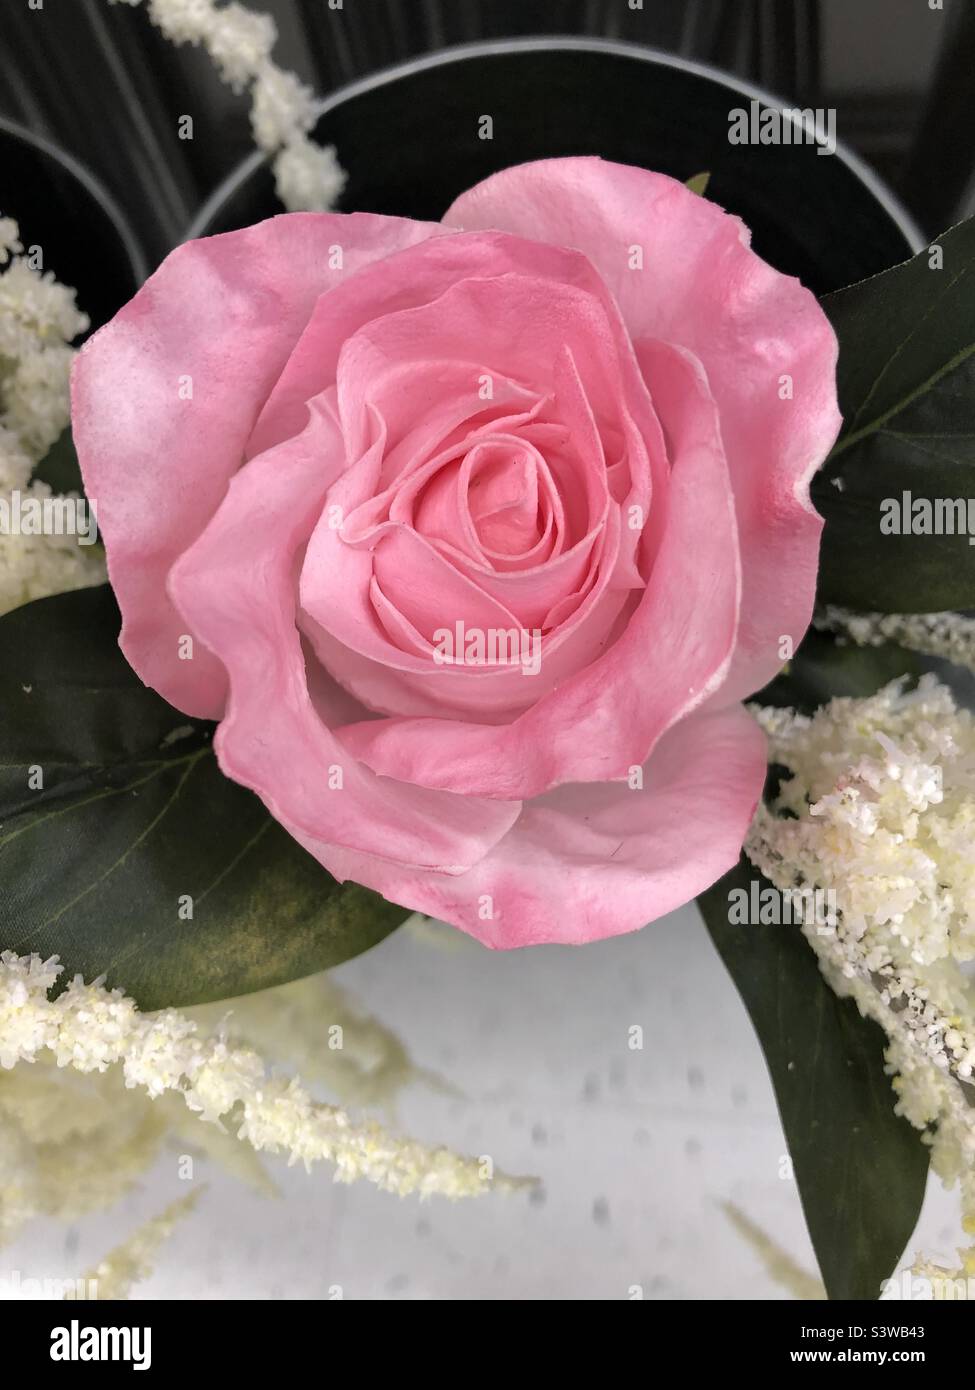 A pink rose. Stock Photo